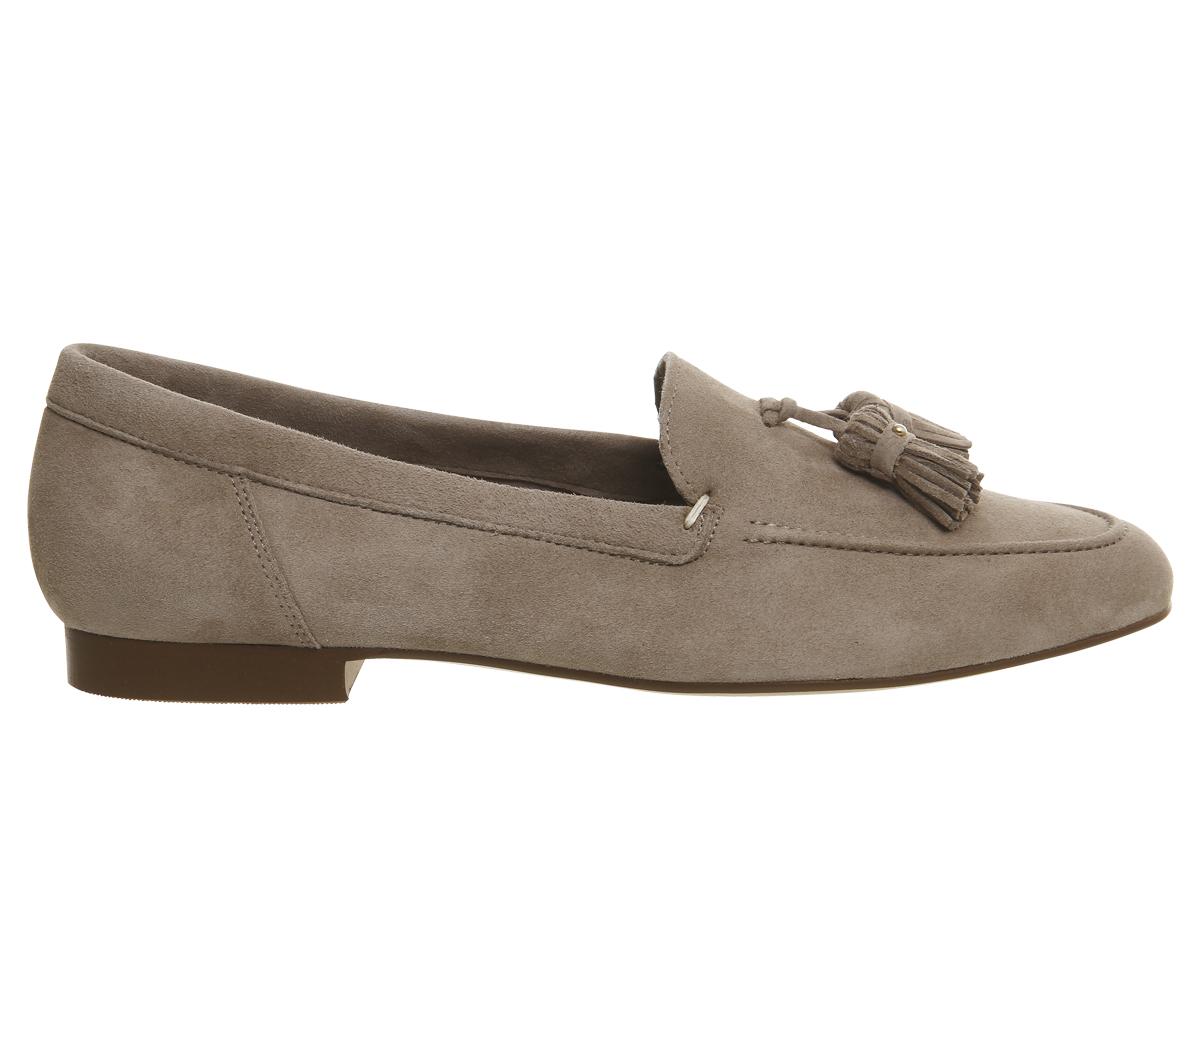 Office Retro Tassel Loafers Taupe Suede - Flats